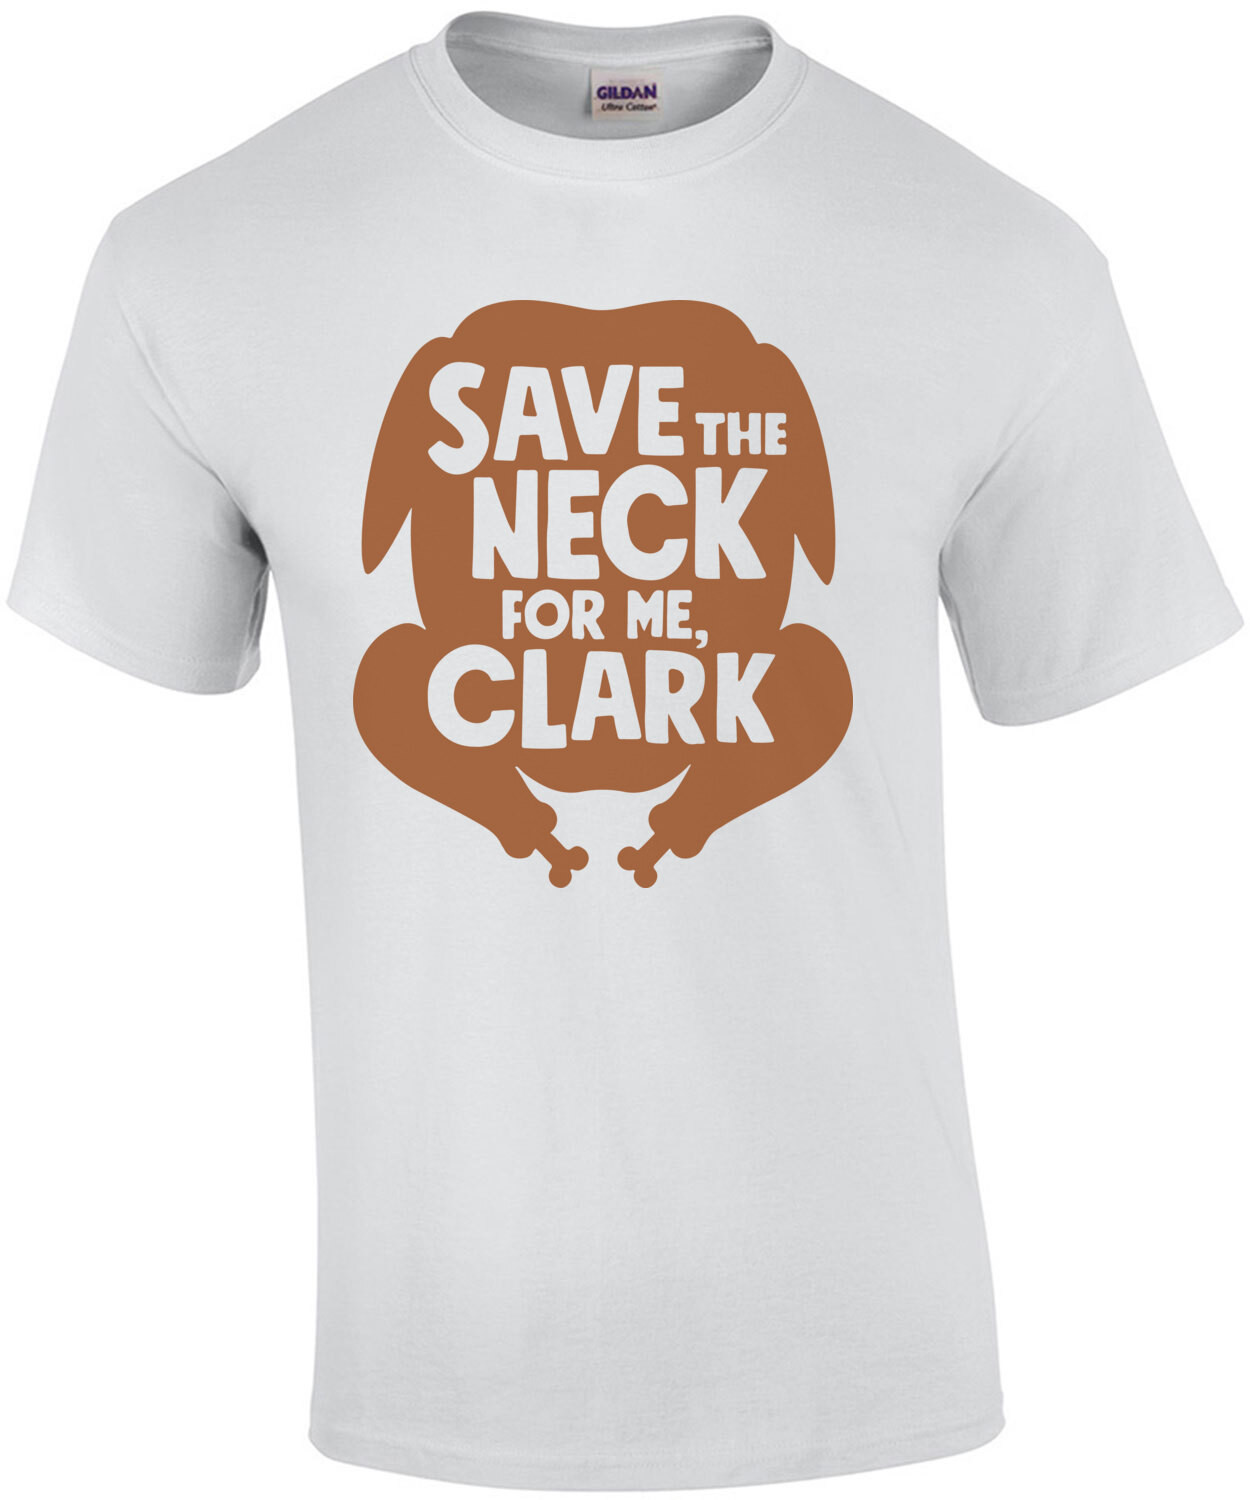 Save The Neck For Me, Clark- Christmas Vacation T-Shirt 